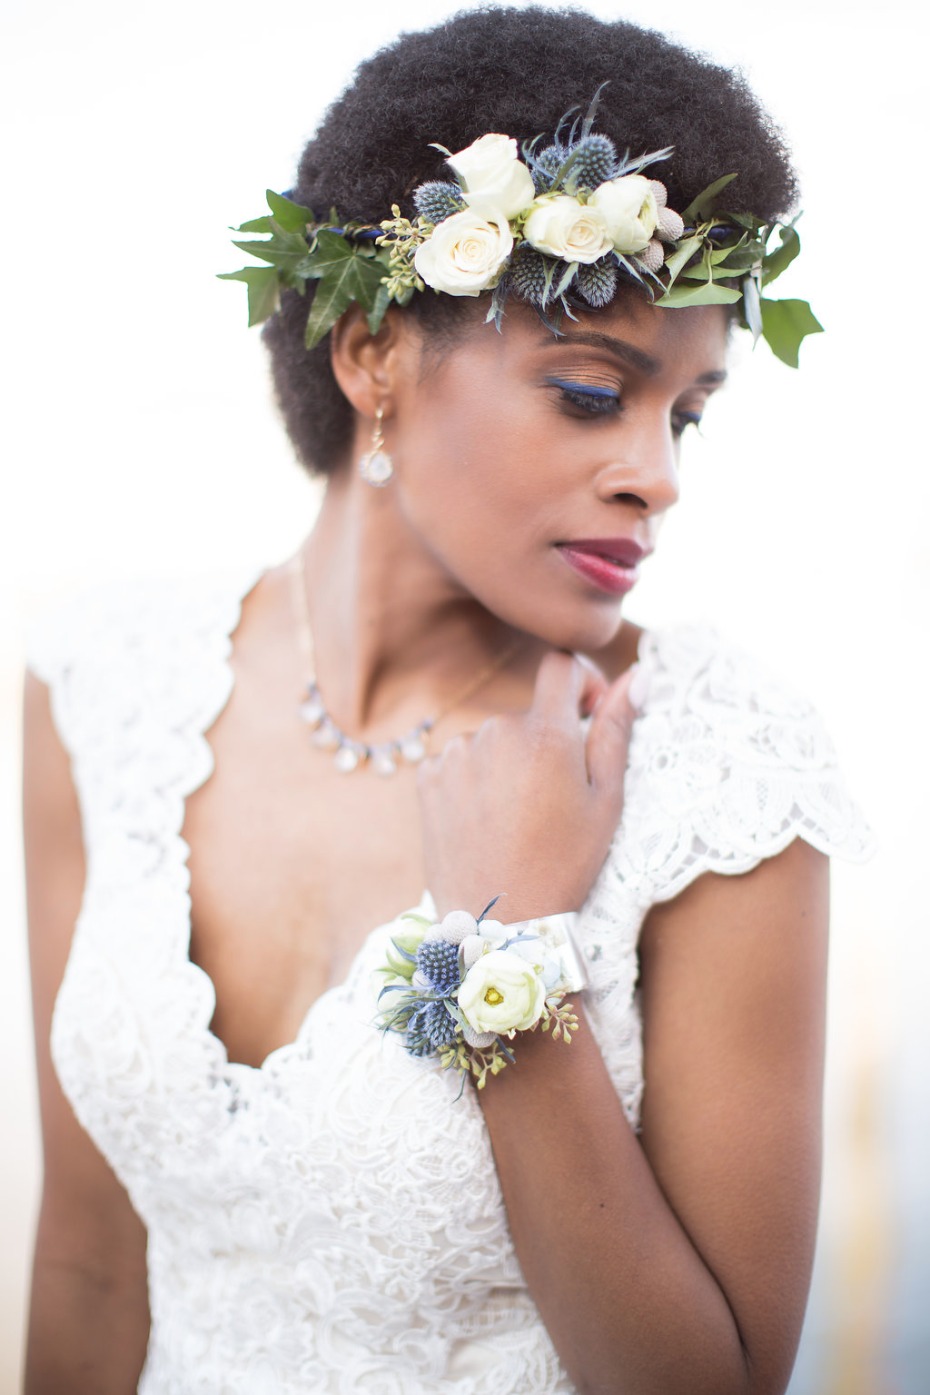 Beautiful flower crown and corsage